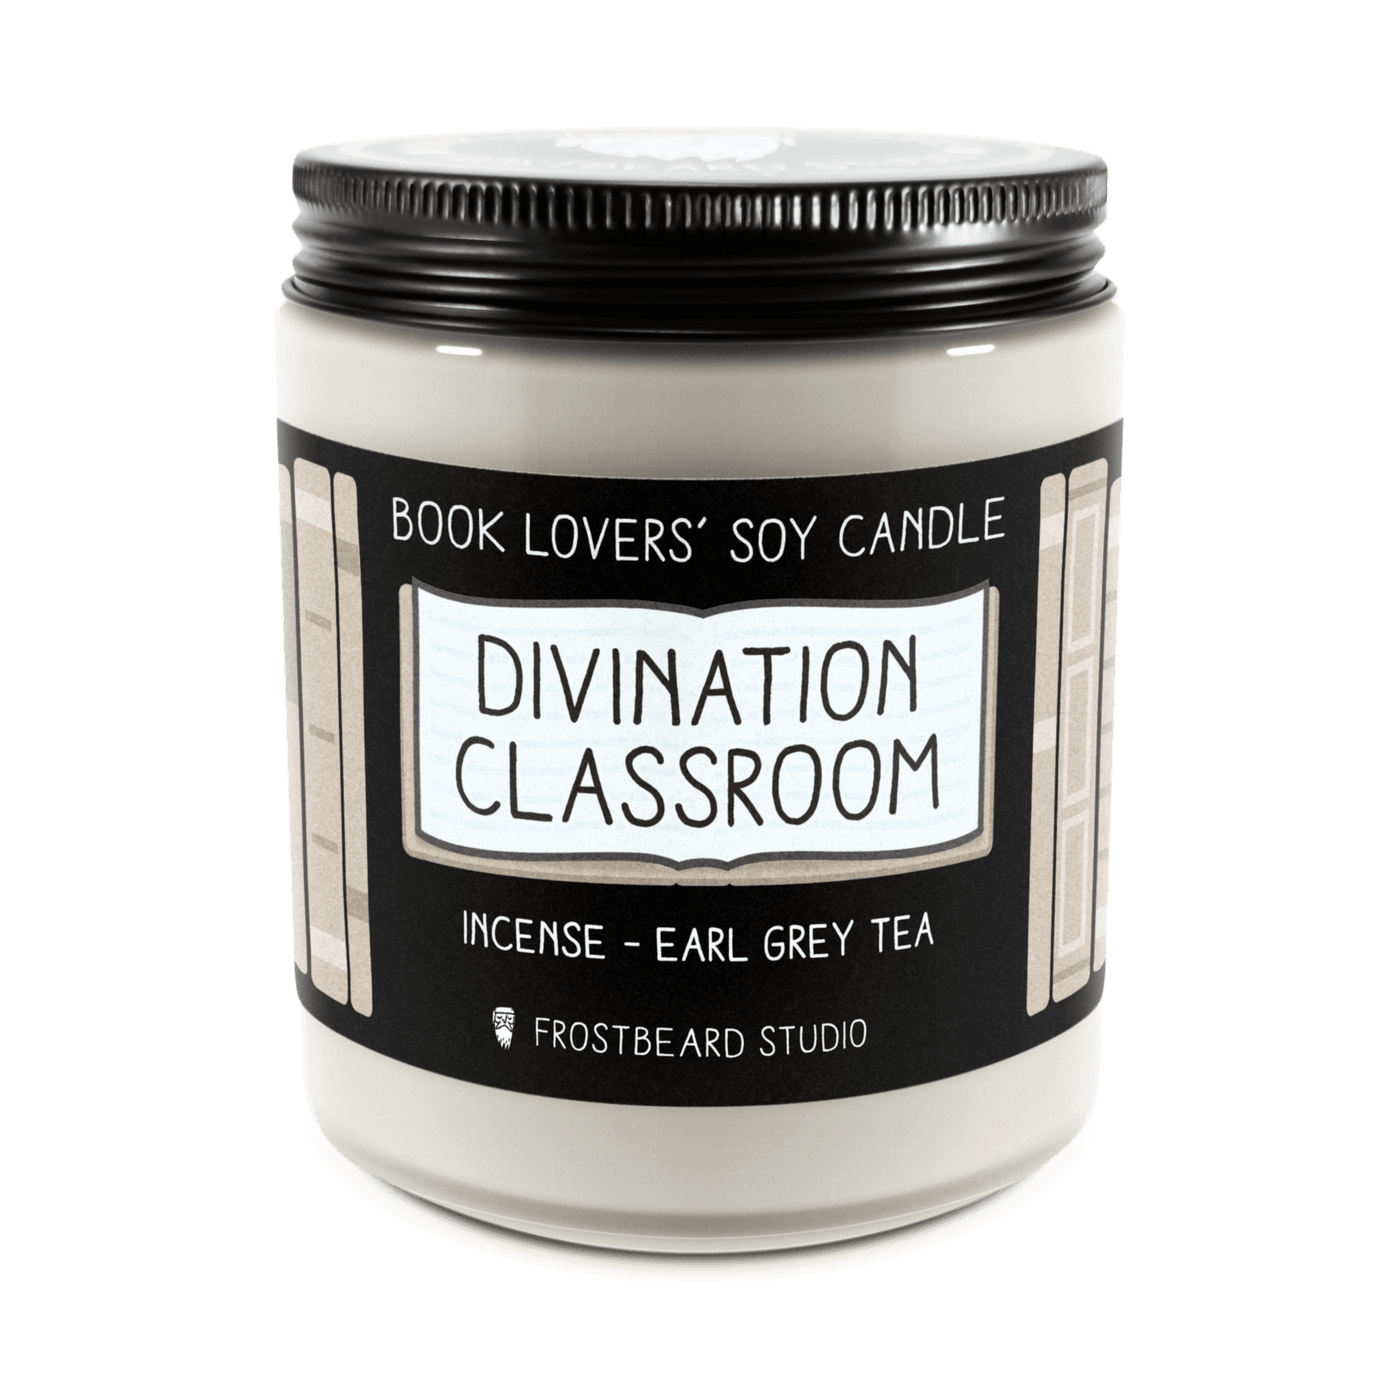 Divination Classroom - 8 oz Jar - Book Lovers' Soy Candle - Frostbeard Studio